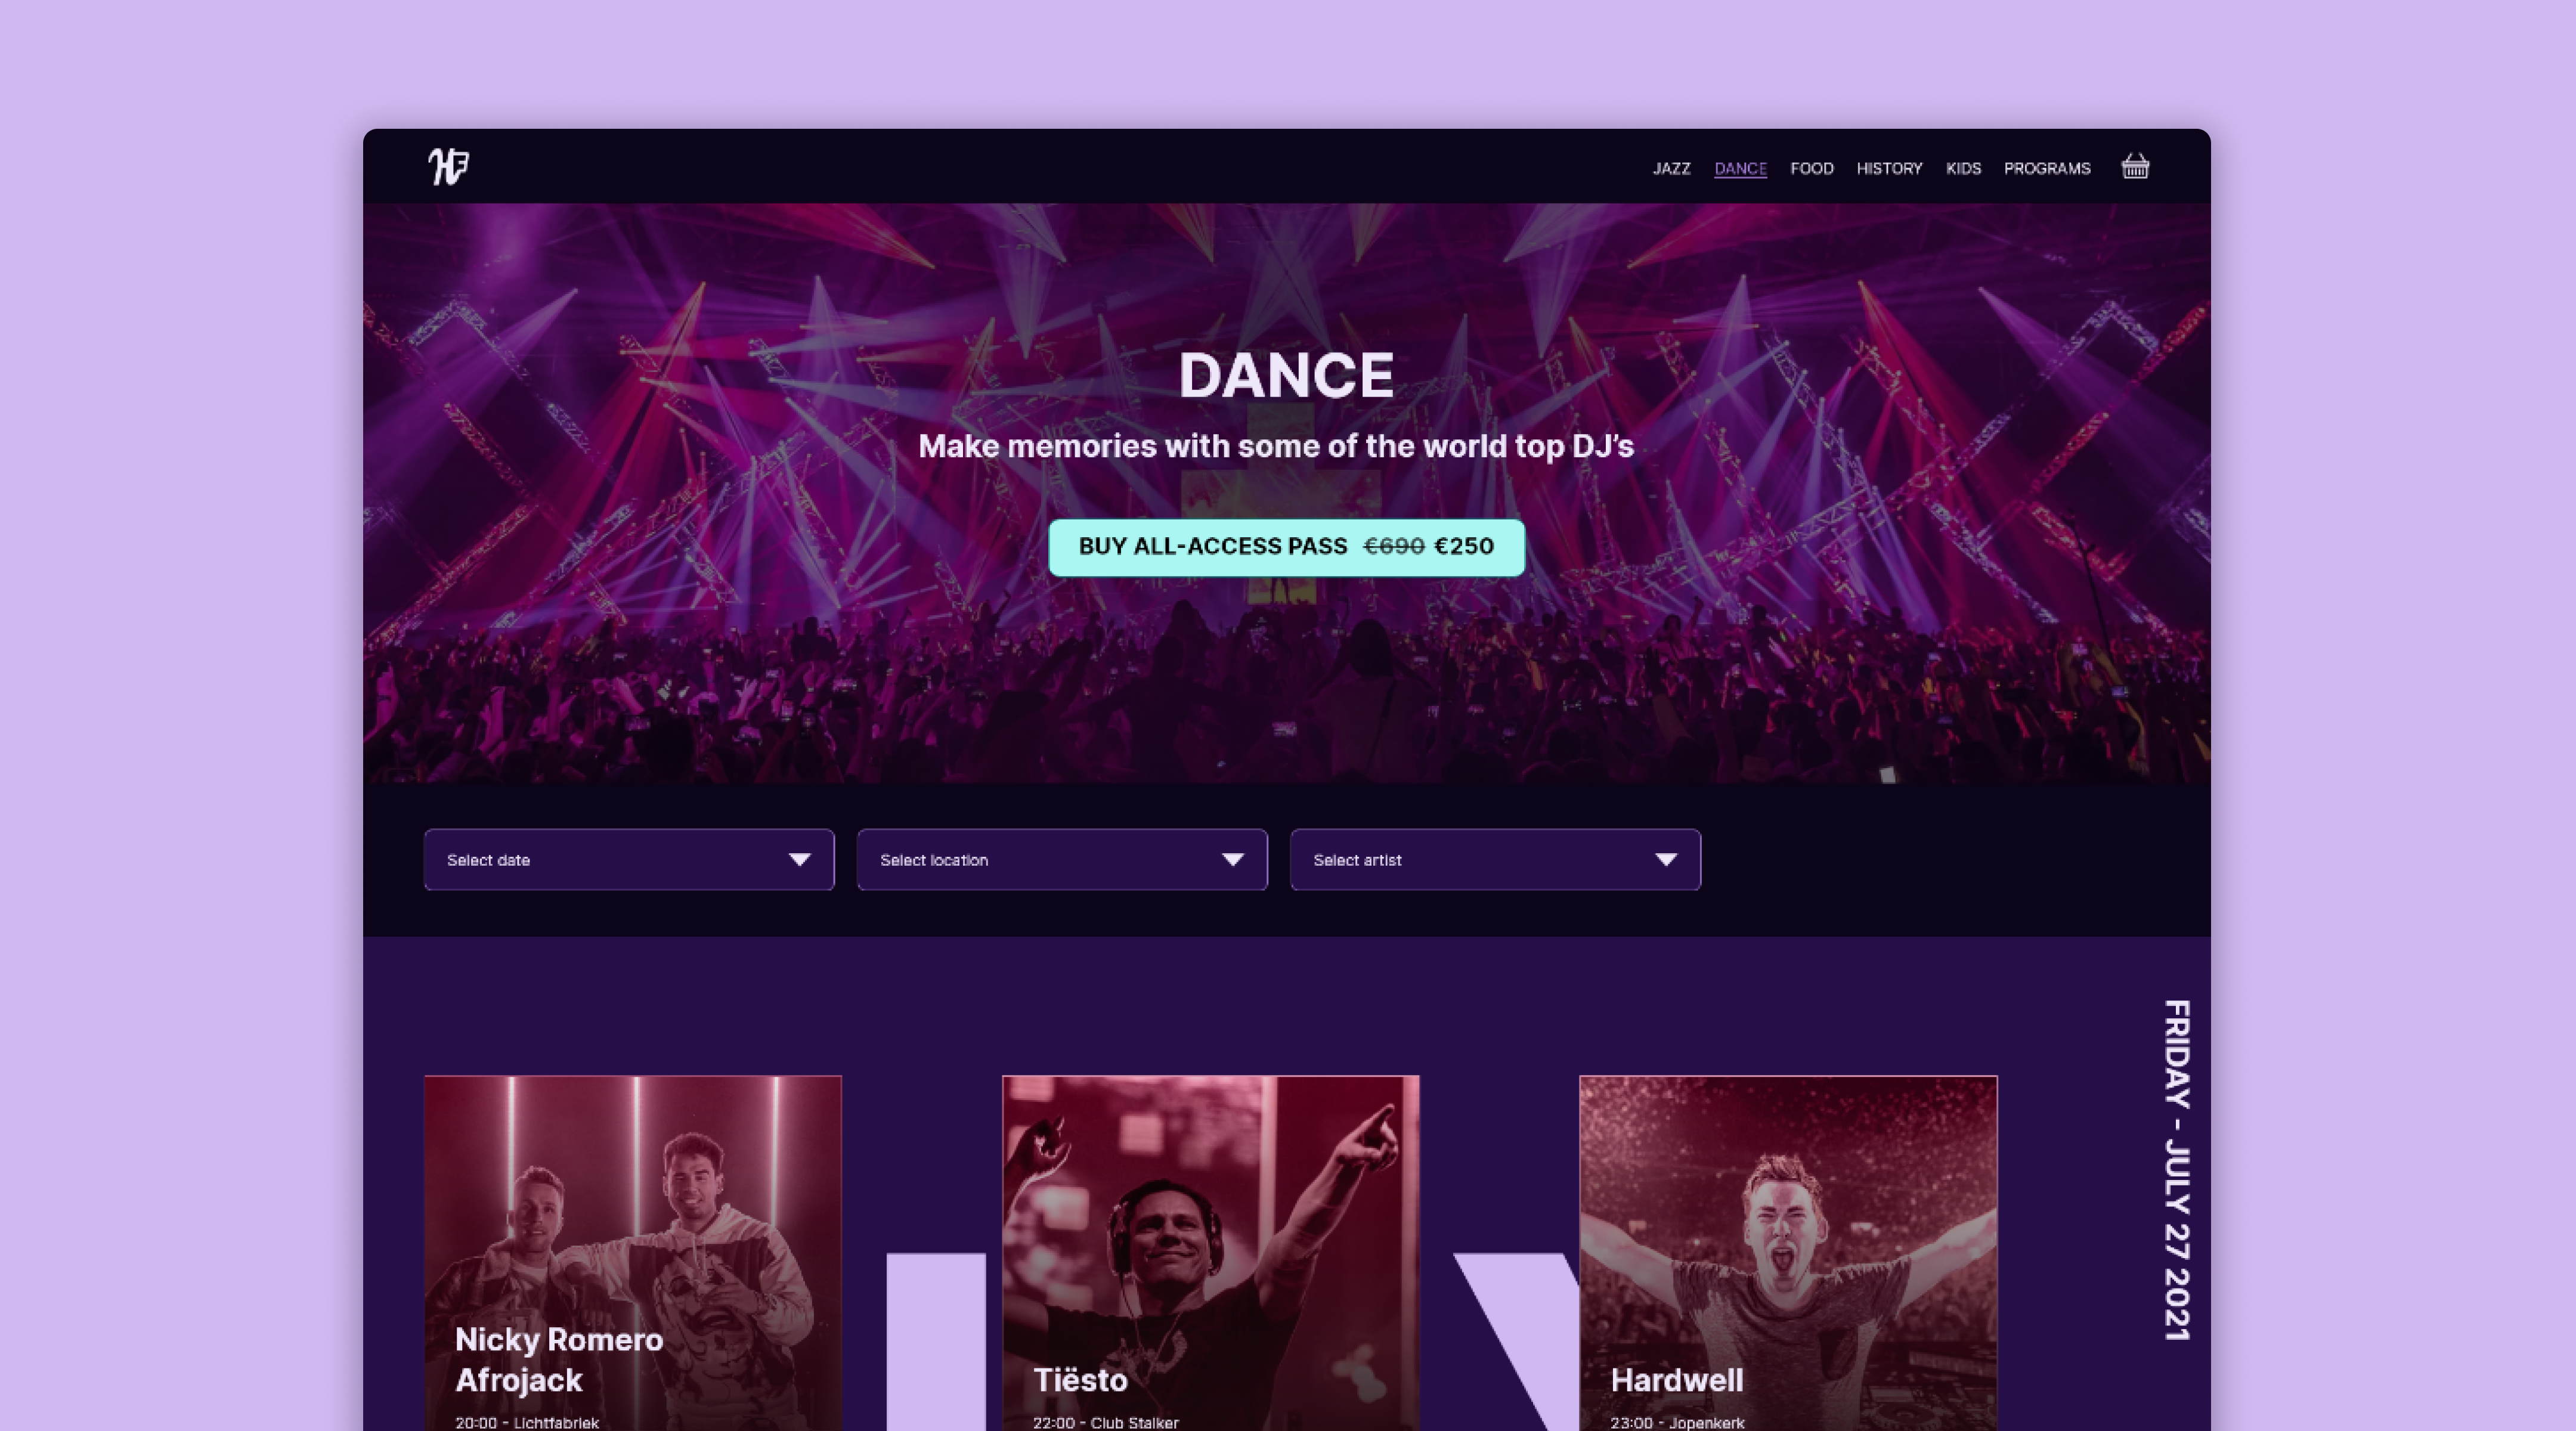 Homepage of haarlem festival dance page, shows the header Dance with the subtitle Make memories with some of the world top DJ's.